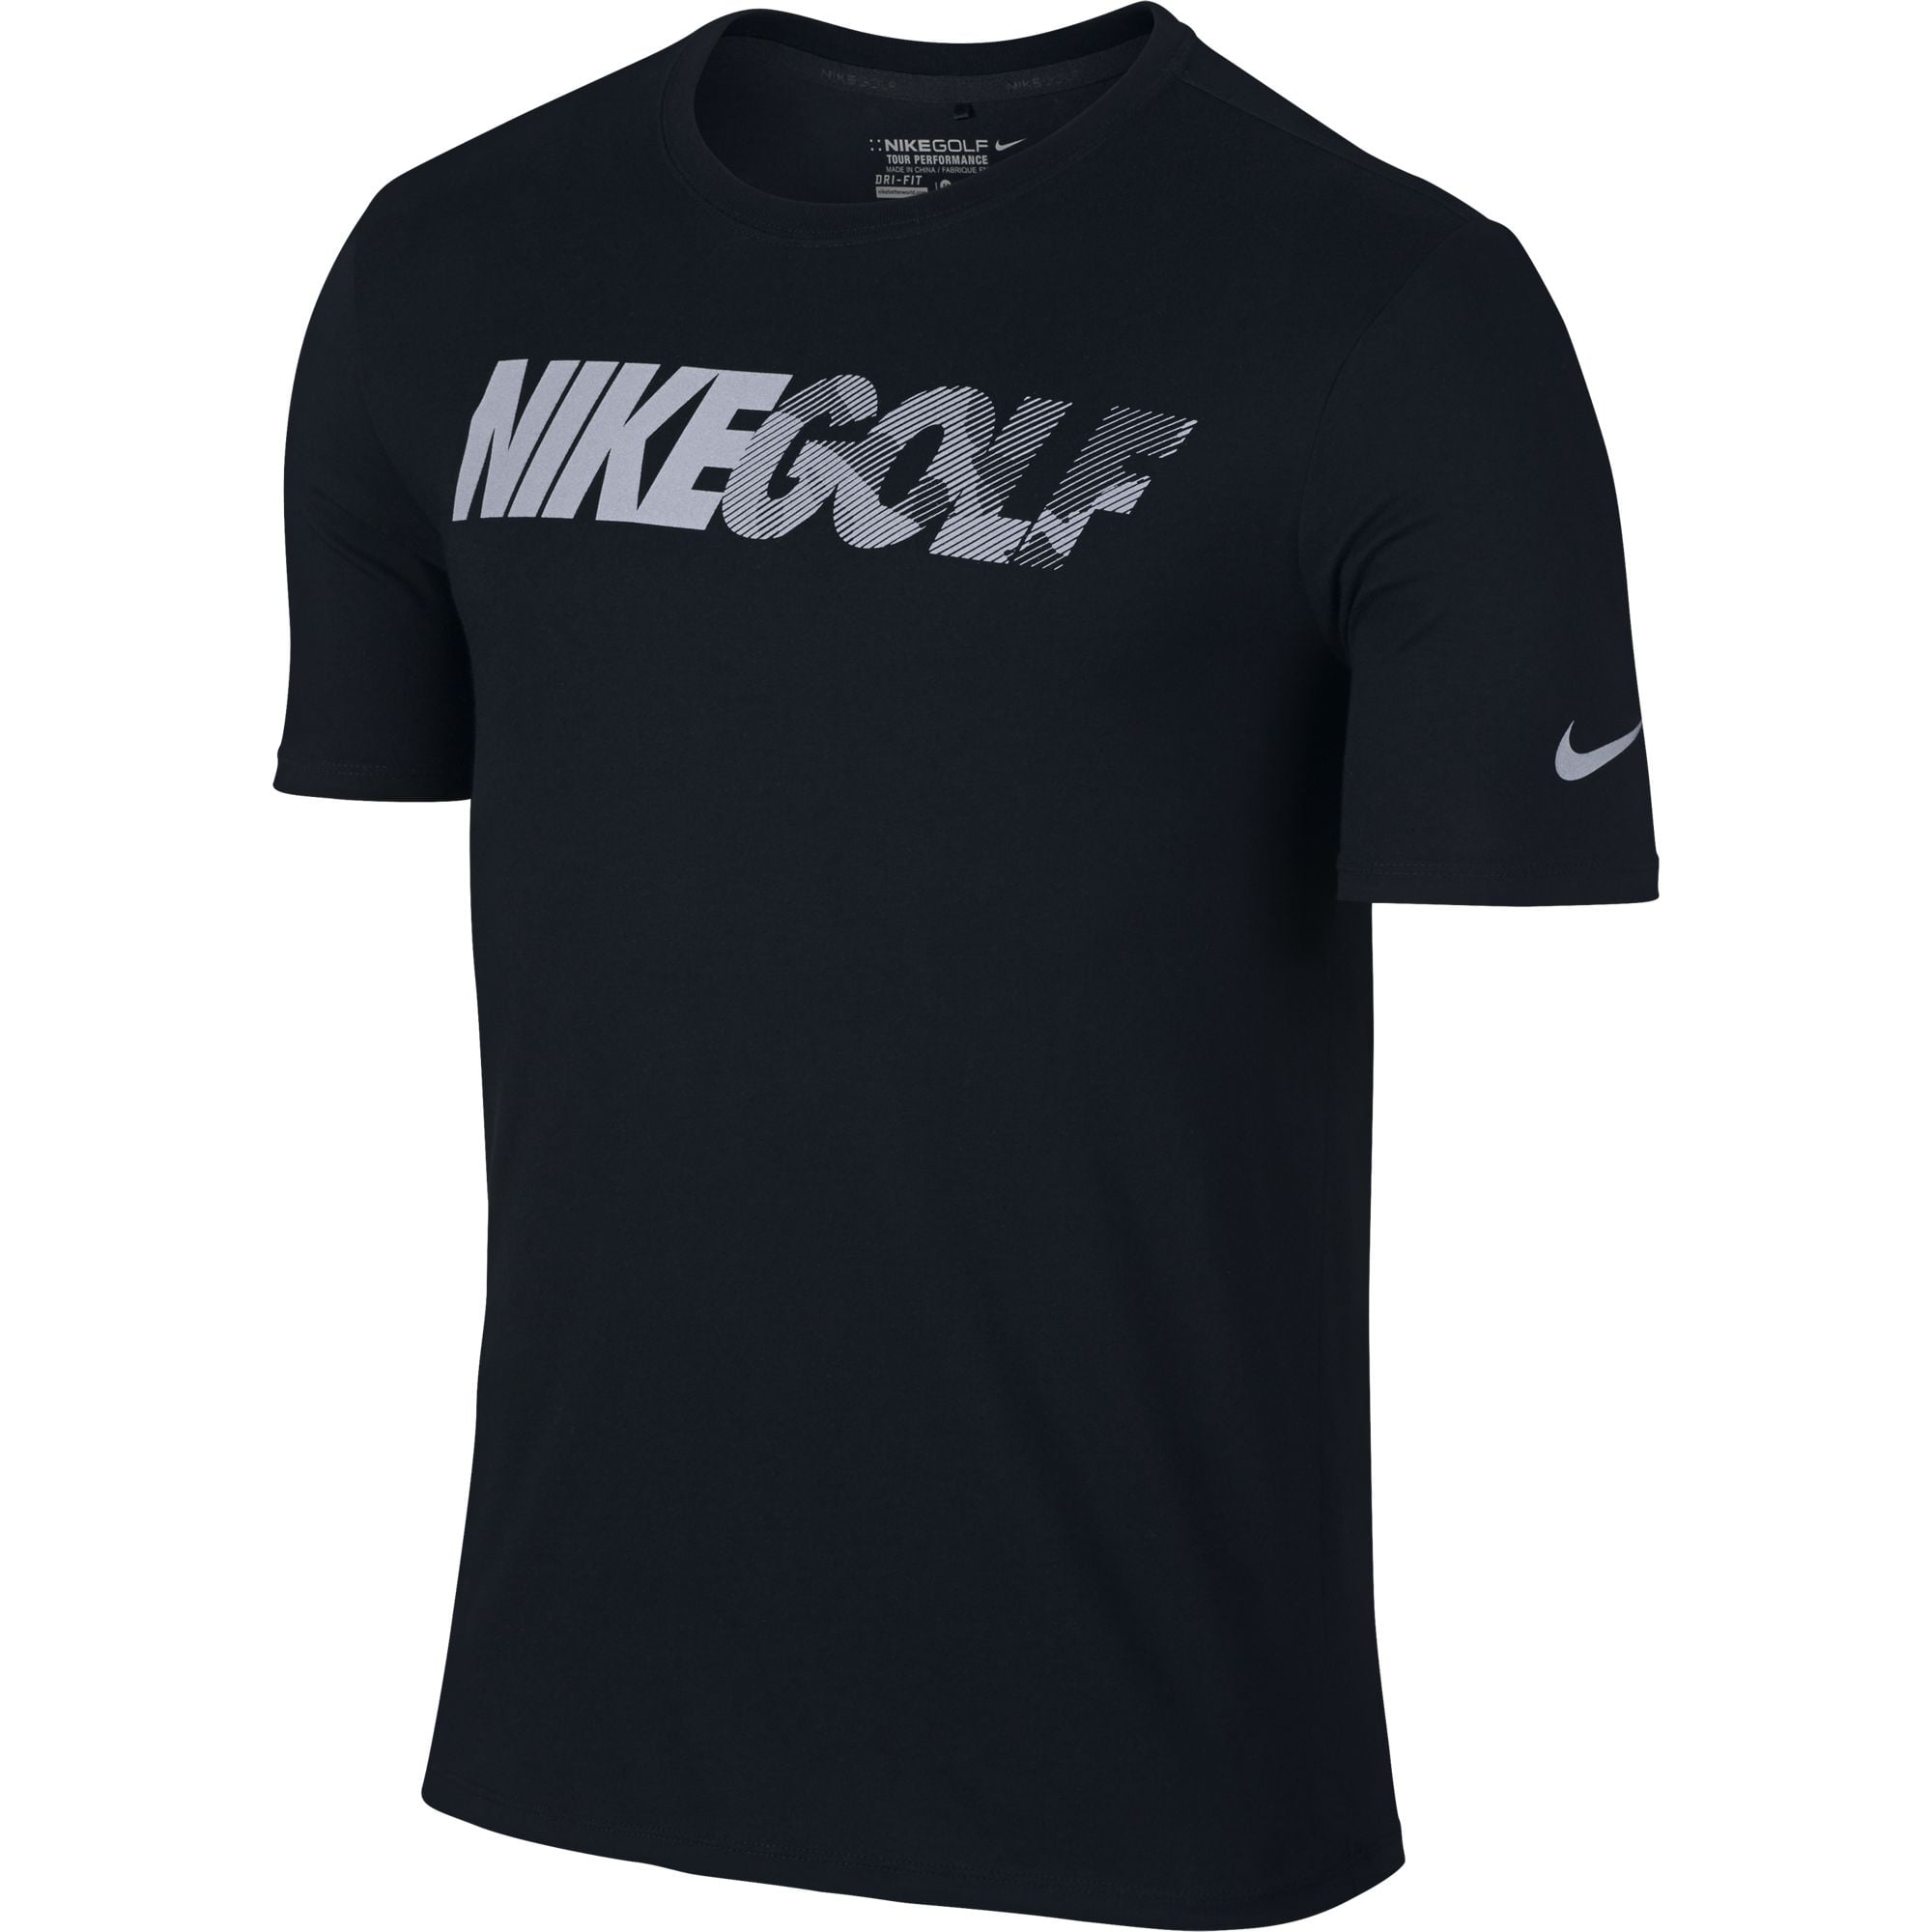 NEW Nike Golf Graphic Tee Black/Reflective Silver Large Golf T-Shirt ...